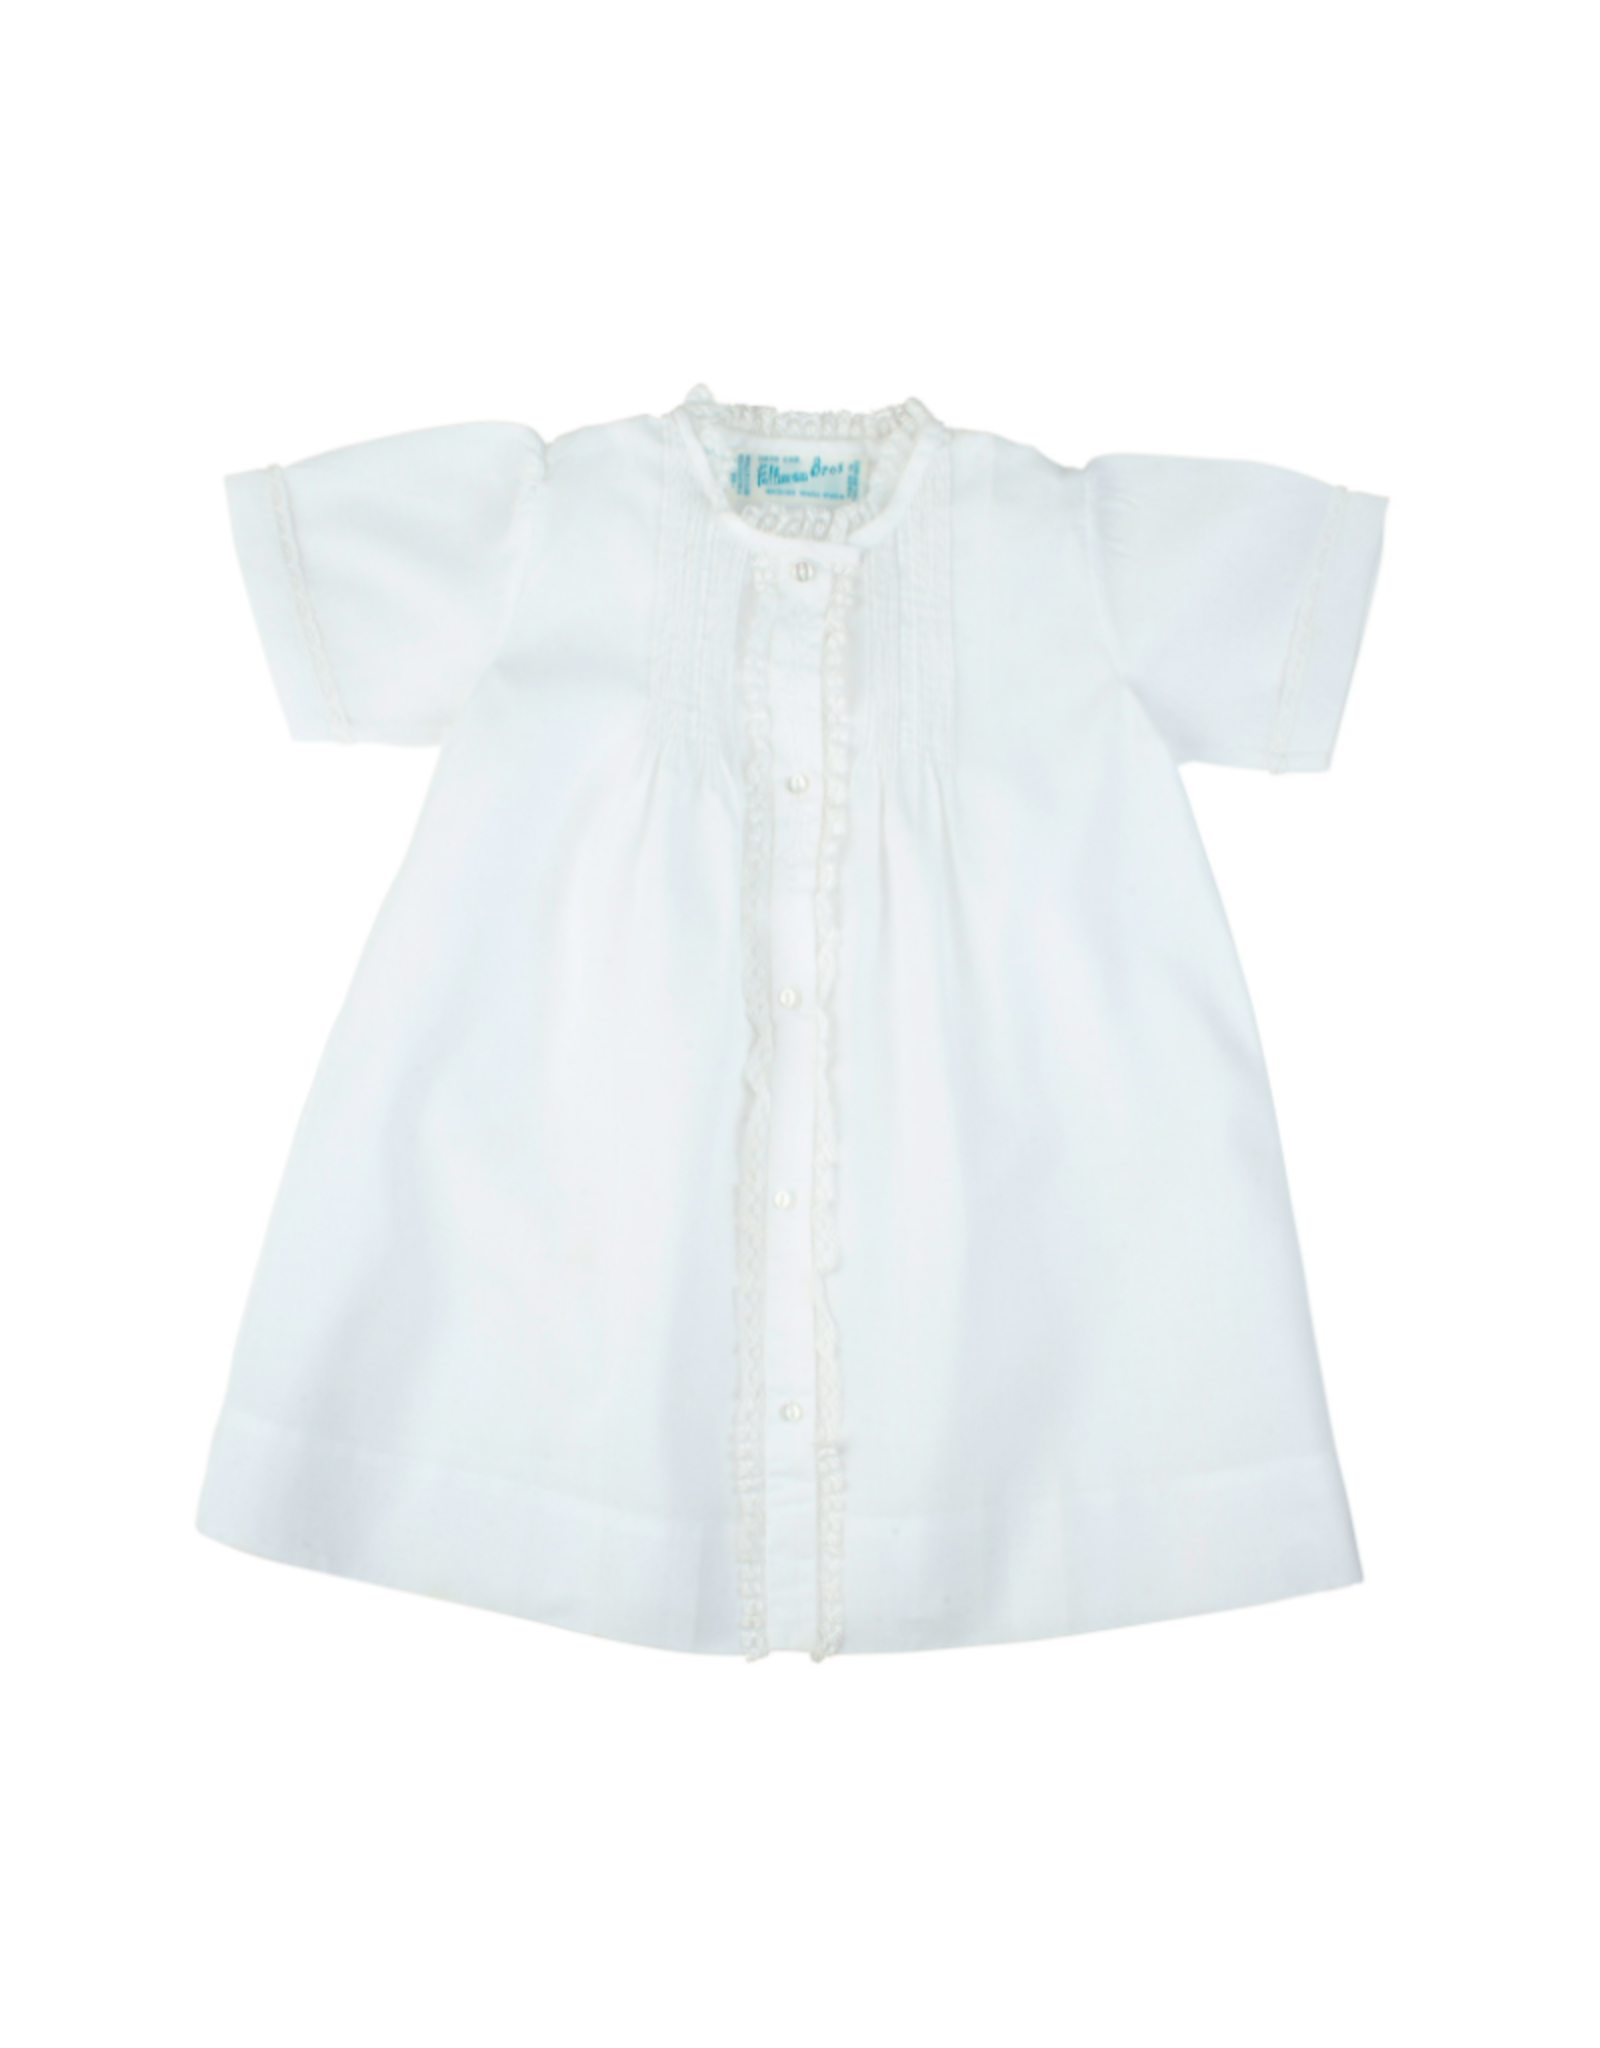 Feltman Brothers White Newborn Folded Daygown With Lace